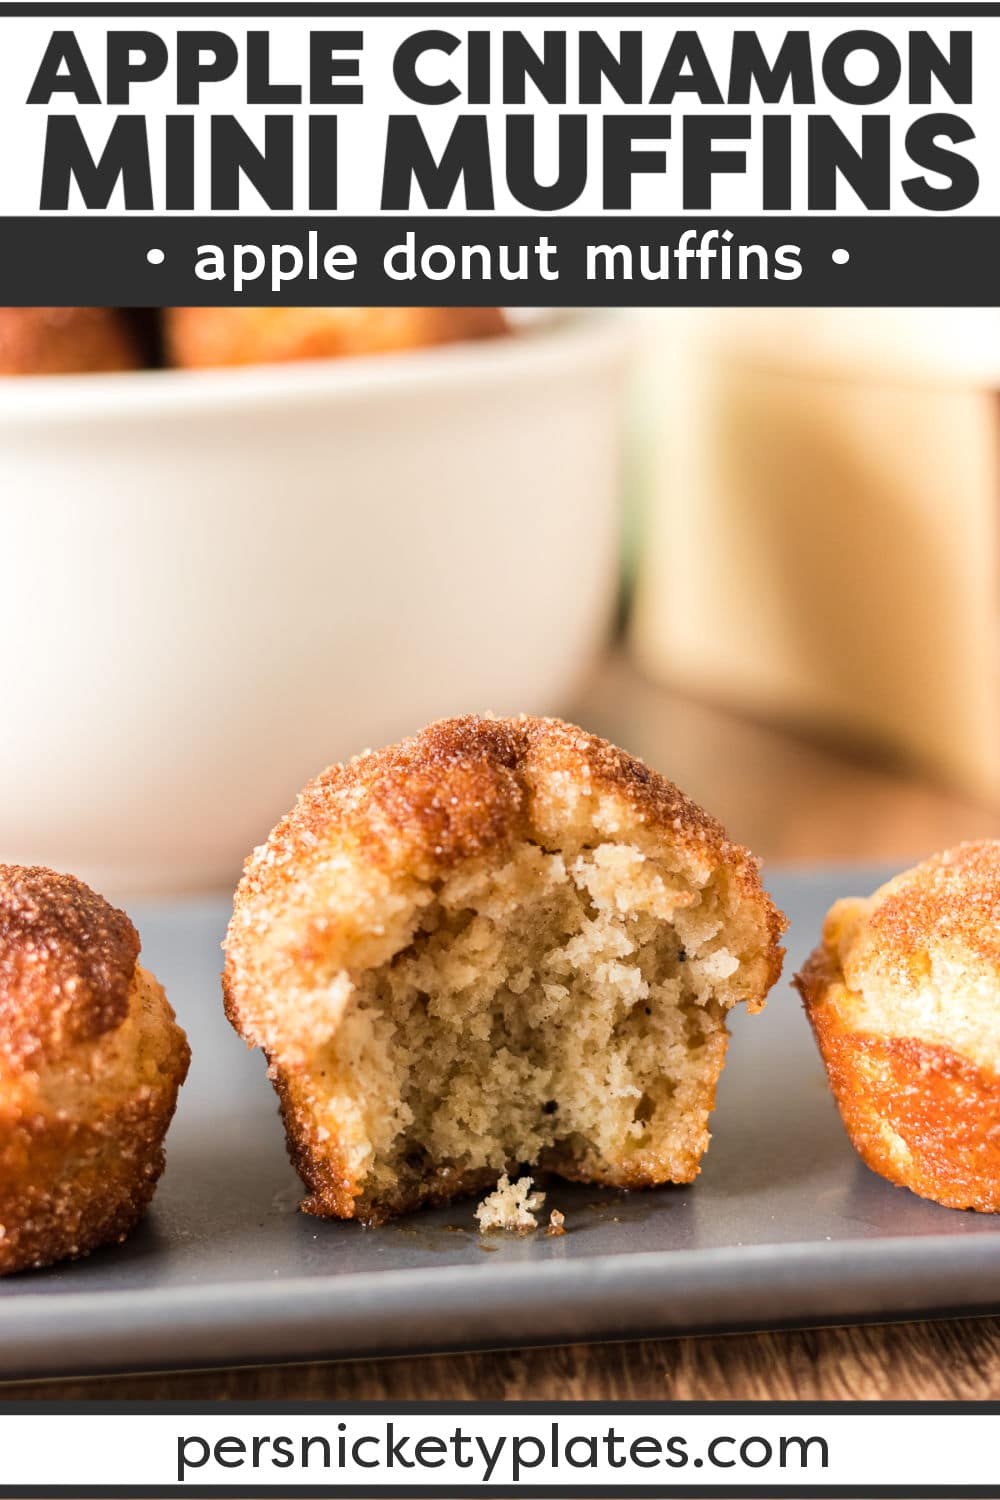 Apple Donut Mini Muffins - Bite sized mini muffins that taste just like cider mill cinnamon sugar donuts filled with bits of apple! | www.persnicketyplates.com